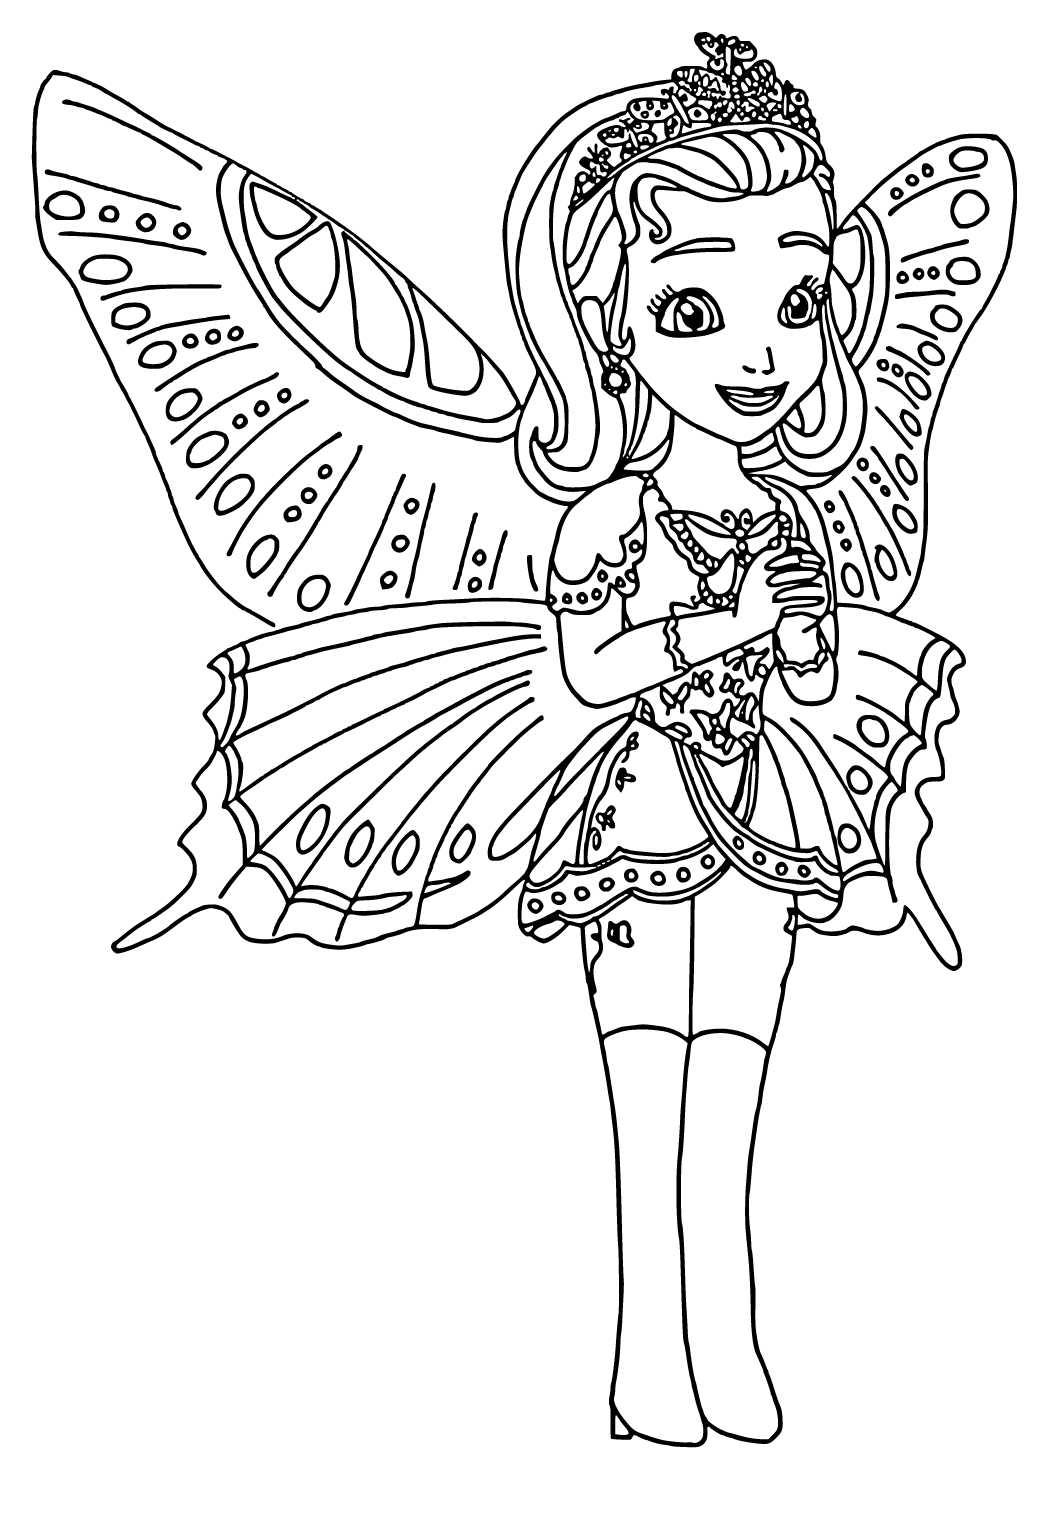 Free printable sofia the first butterfly coloring page for adults and kids